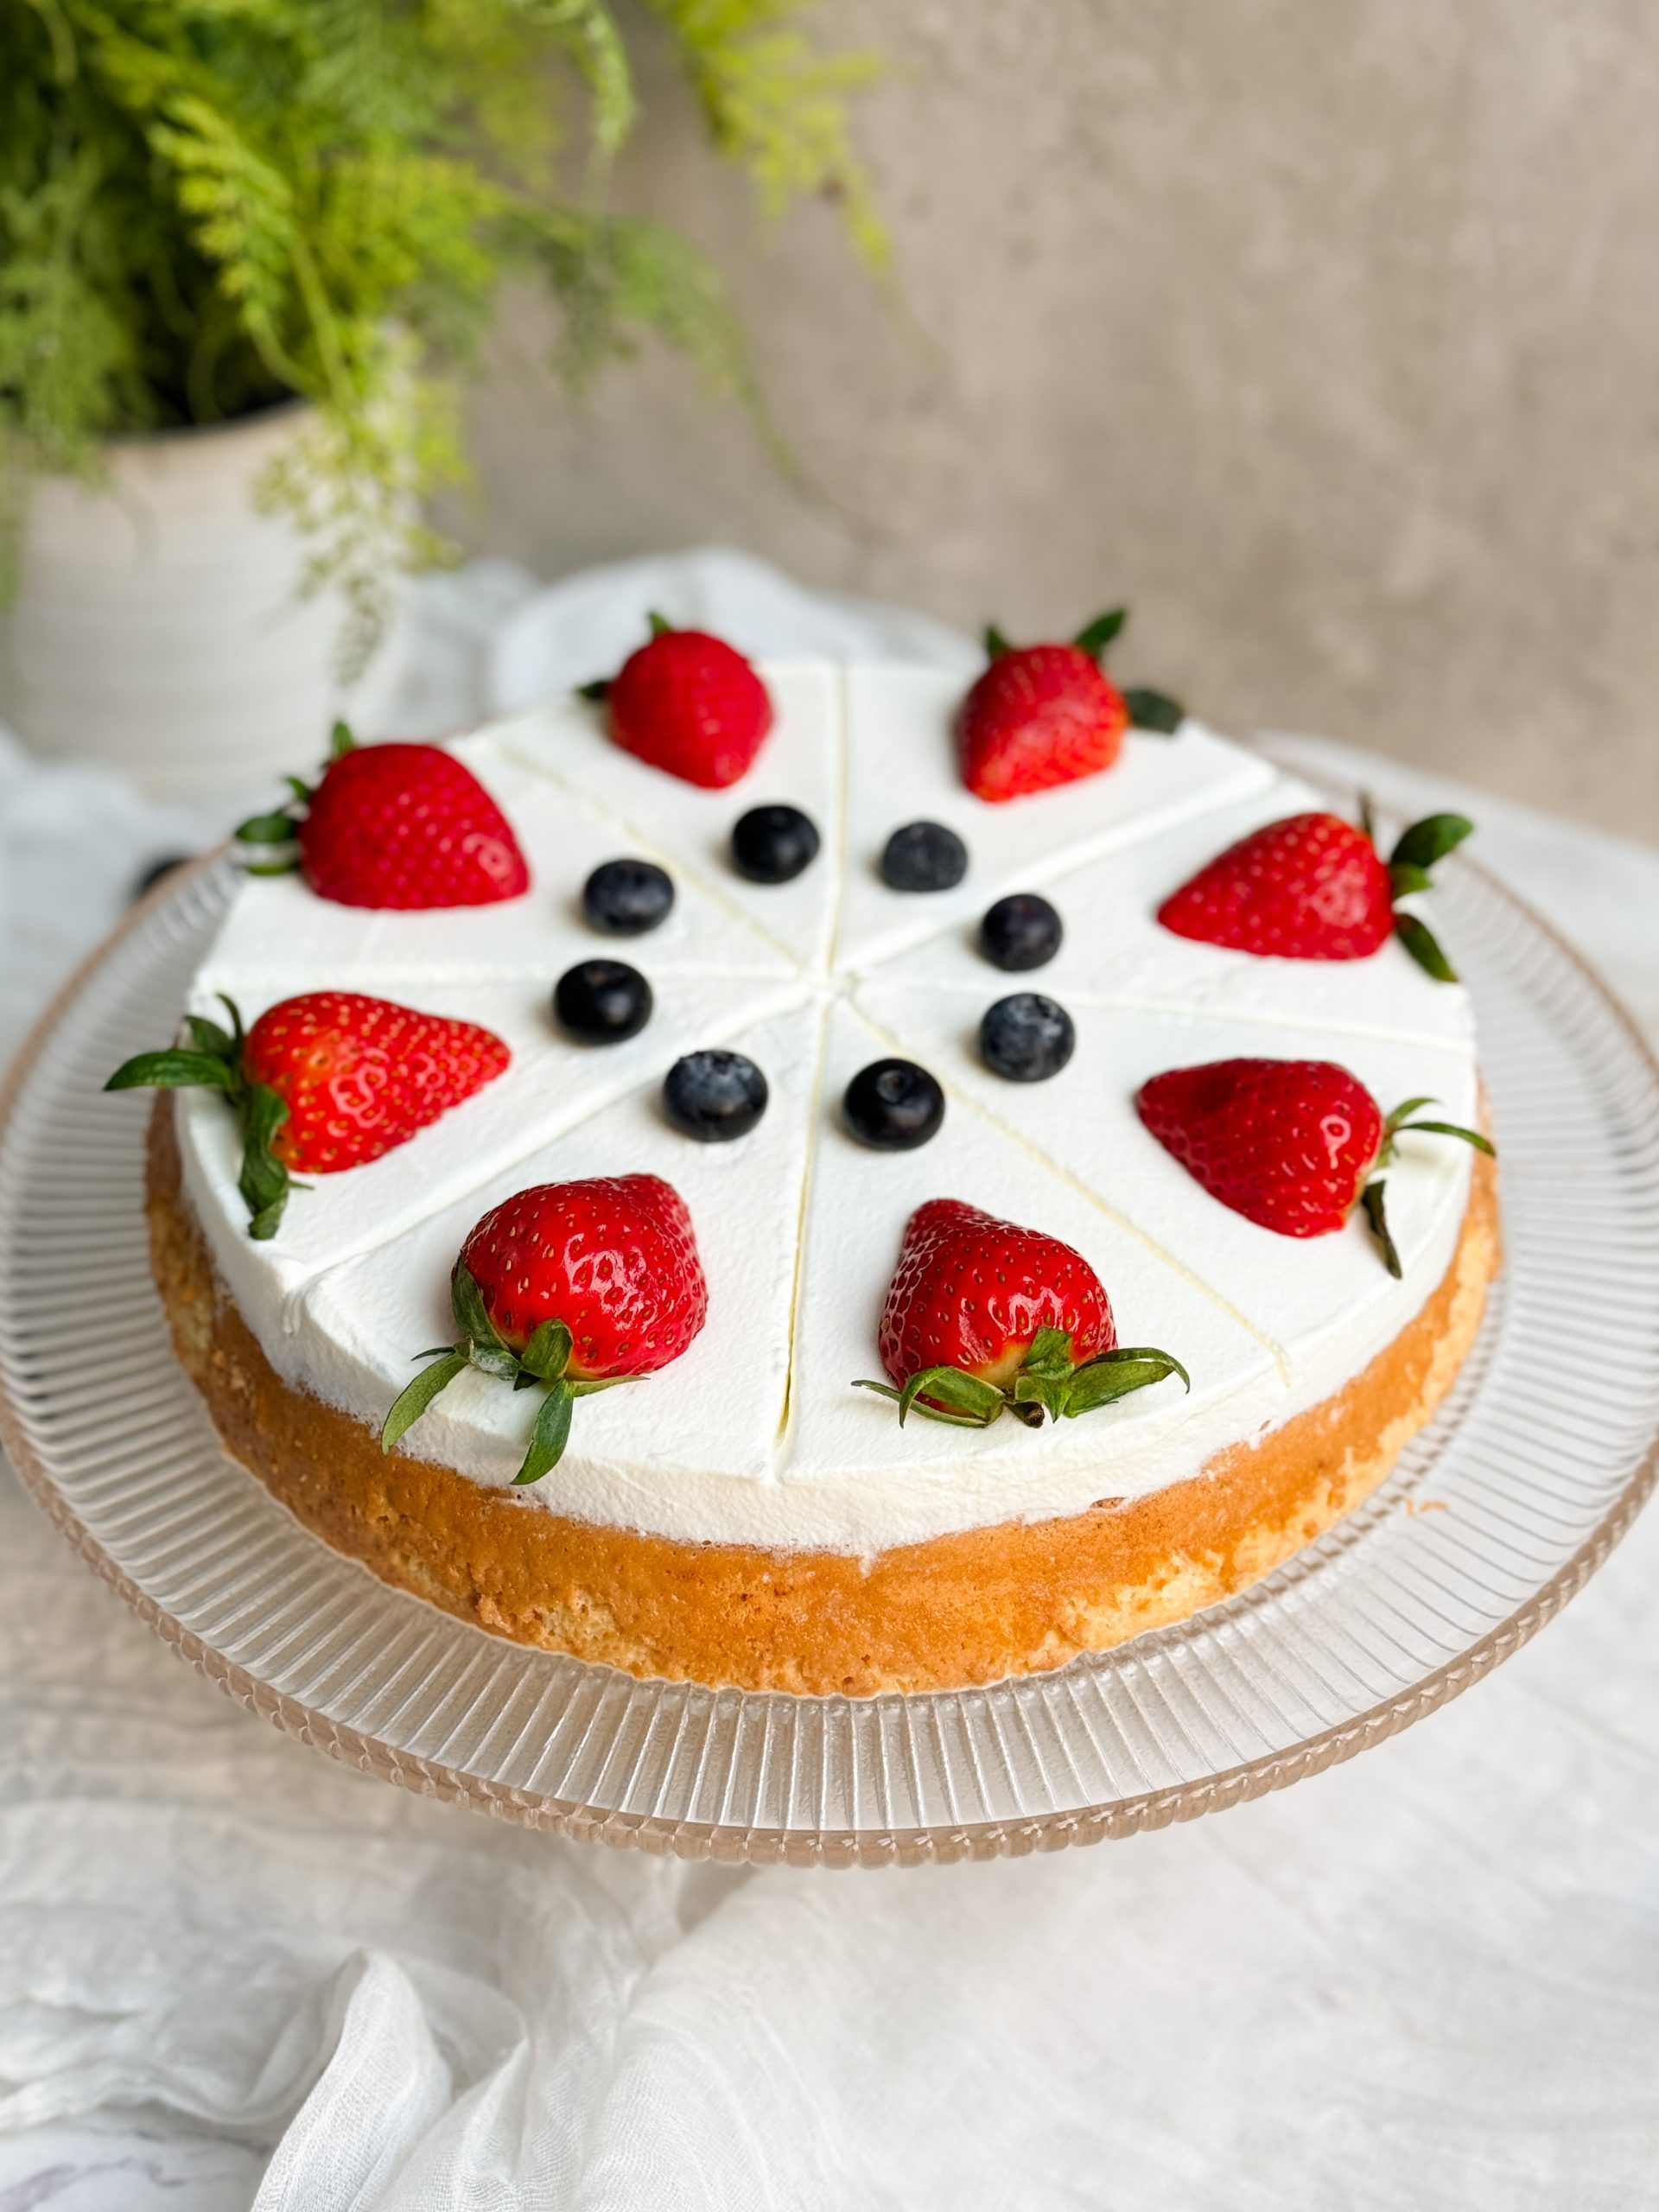 tres leches cake on a glass serving stand. cake is decorated with a thick layer of whipped cream and fresh berries